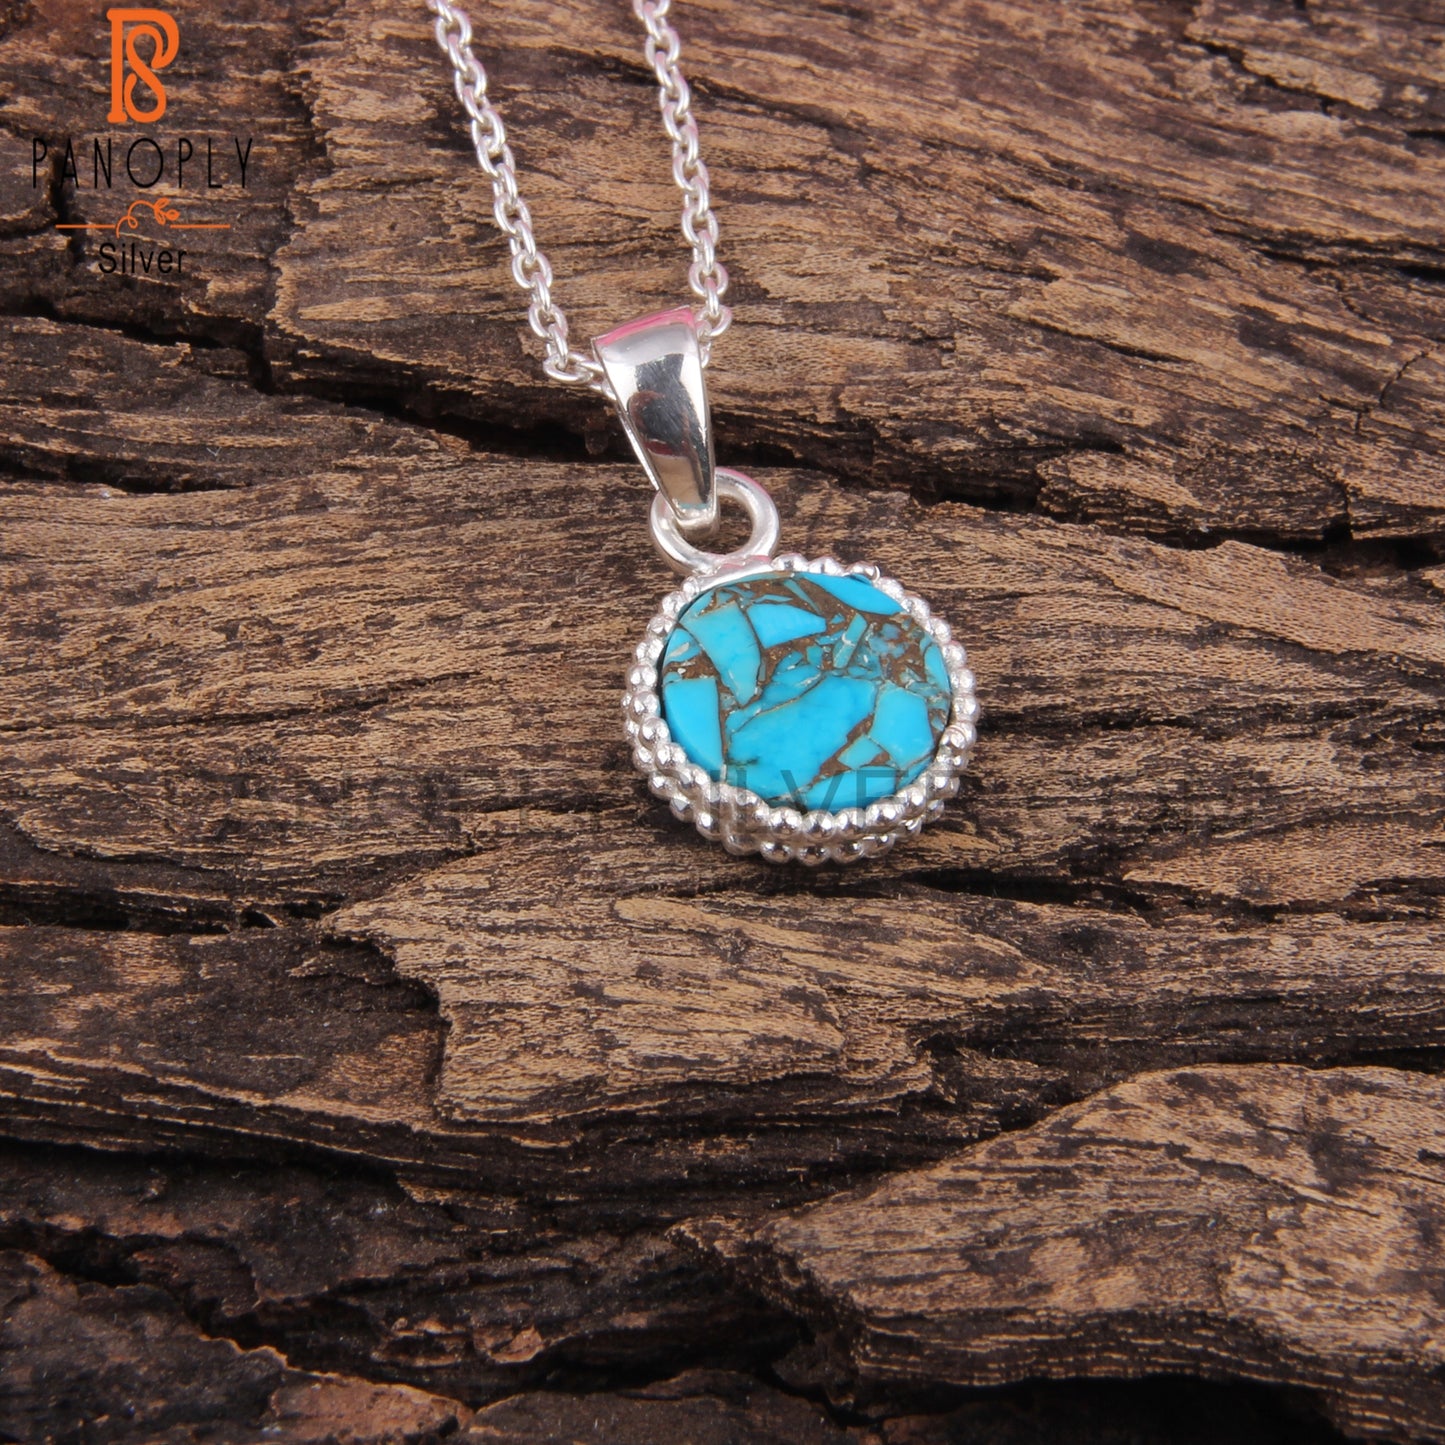 Mojave Copper Turquoise 925 Silver Pendant With Chain